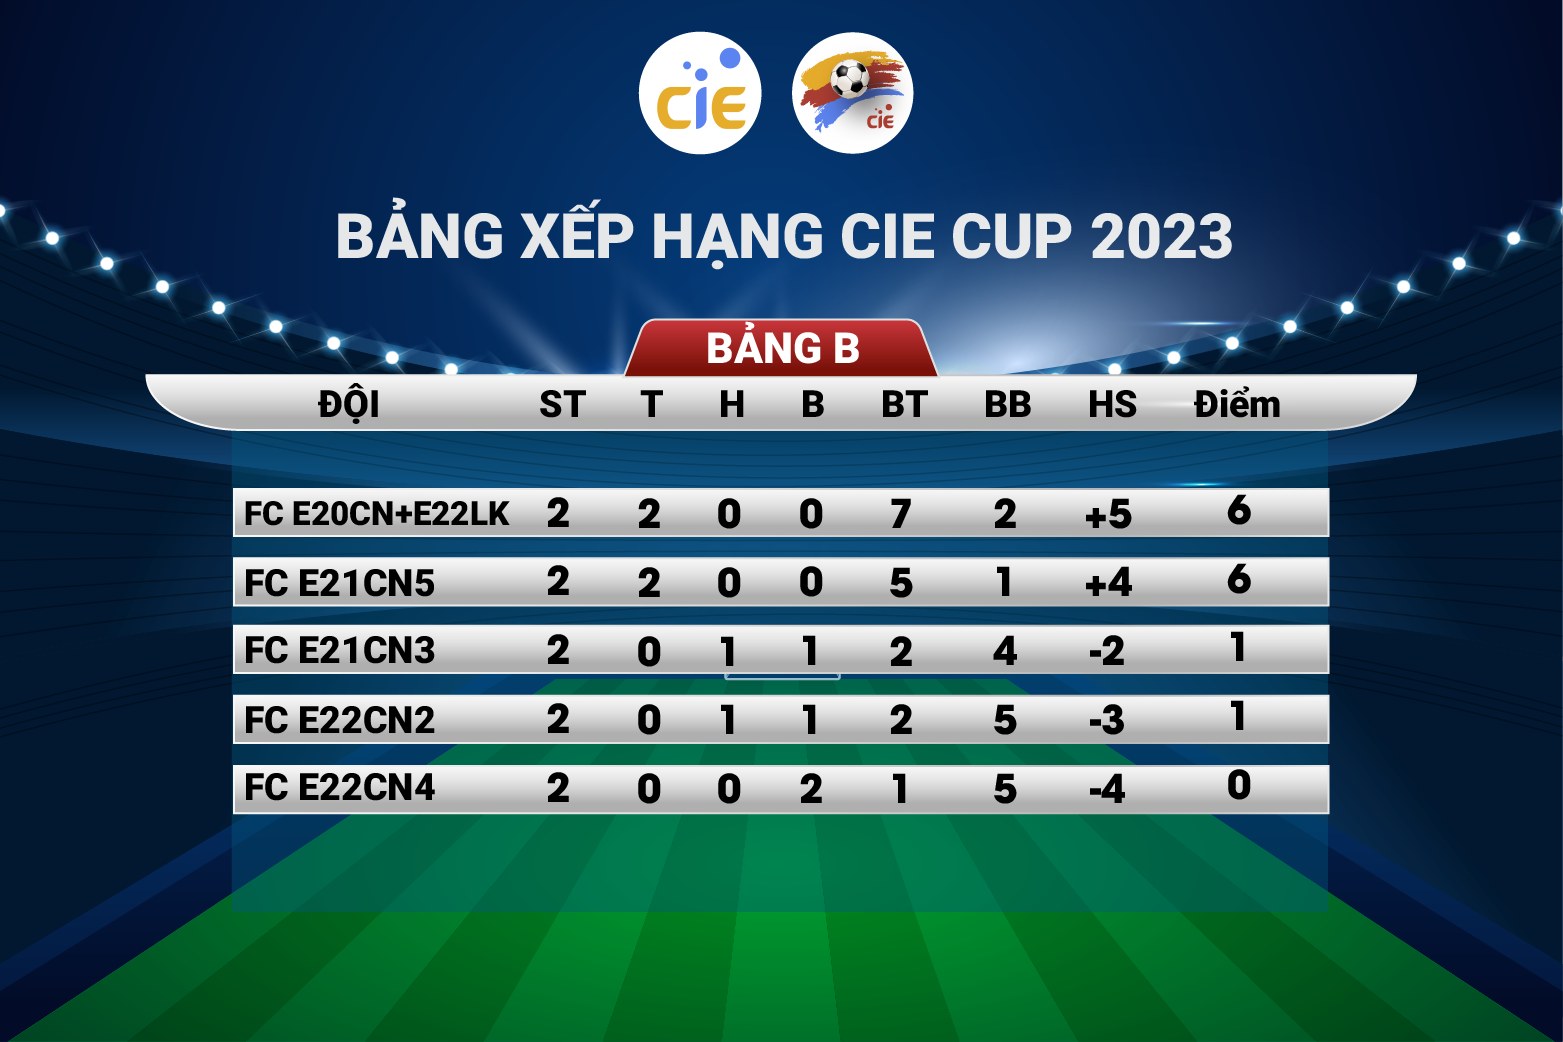 CIE CUP 2023 Rankings of Group B